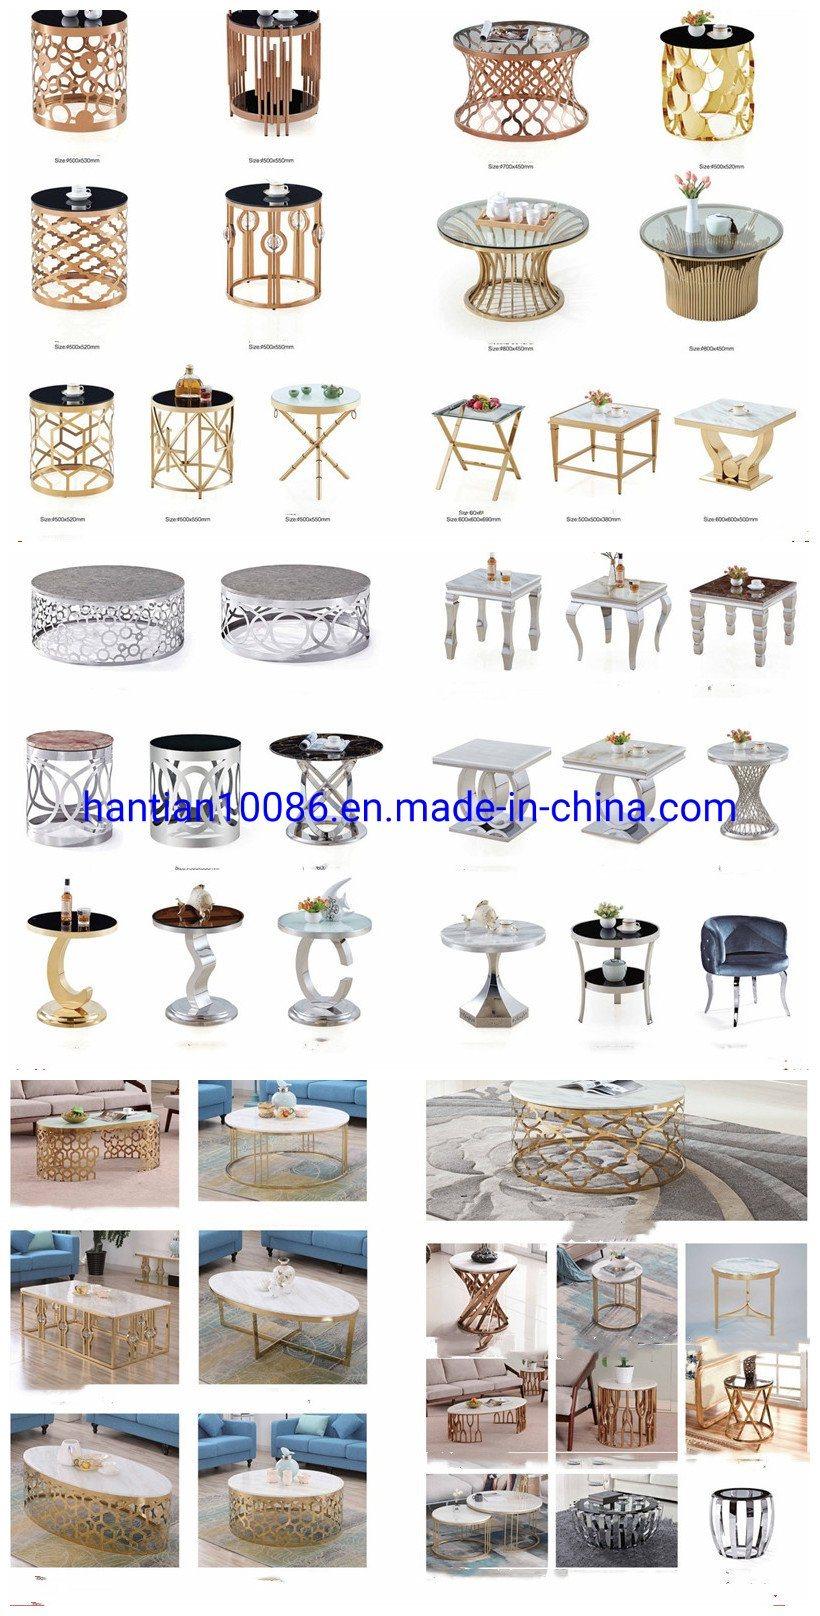 New Top Selling Golden White Top Luxury Hotel Corner Wall Stainless Steel Console Table